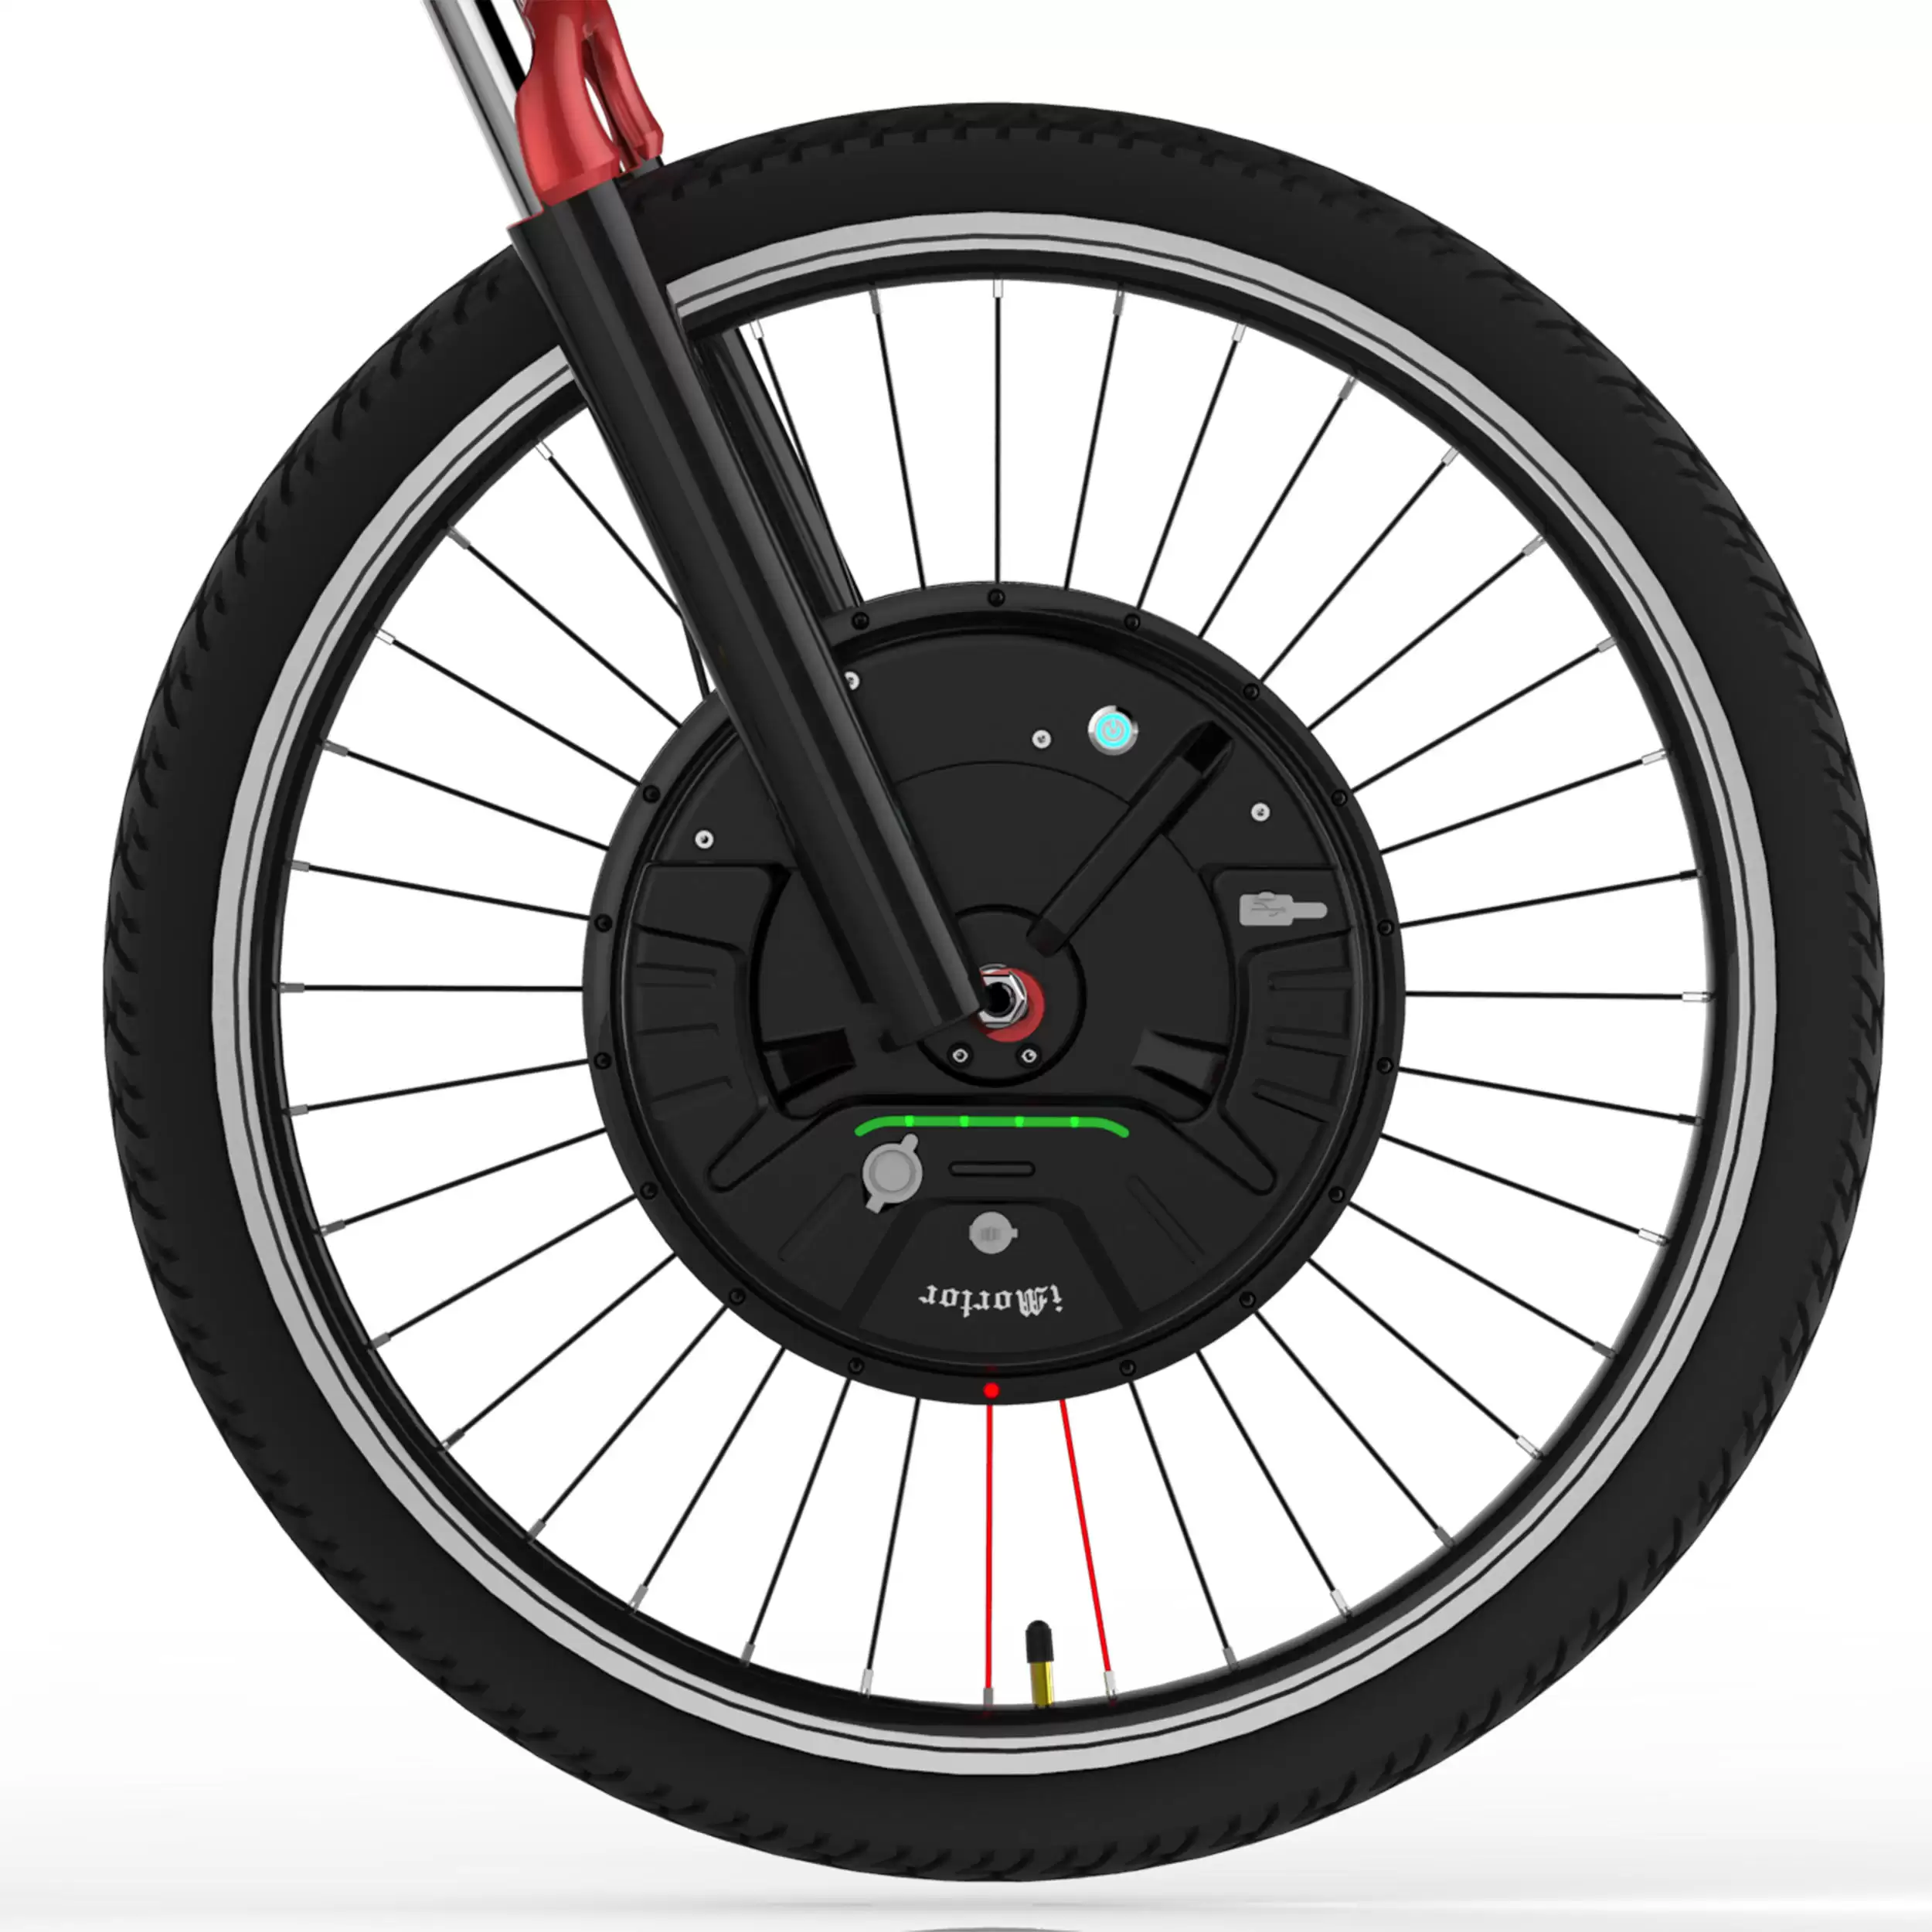 Order In Just $389.99 Imortor 3.0 Full Wireless 26in/700c 350w 24v Brushless Motor Intelligence Bicycle Front Wheel With This Coupon At Banggood